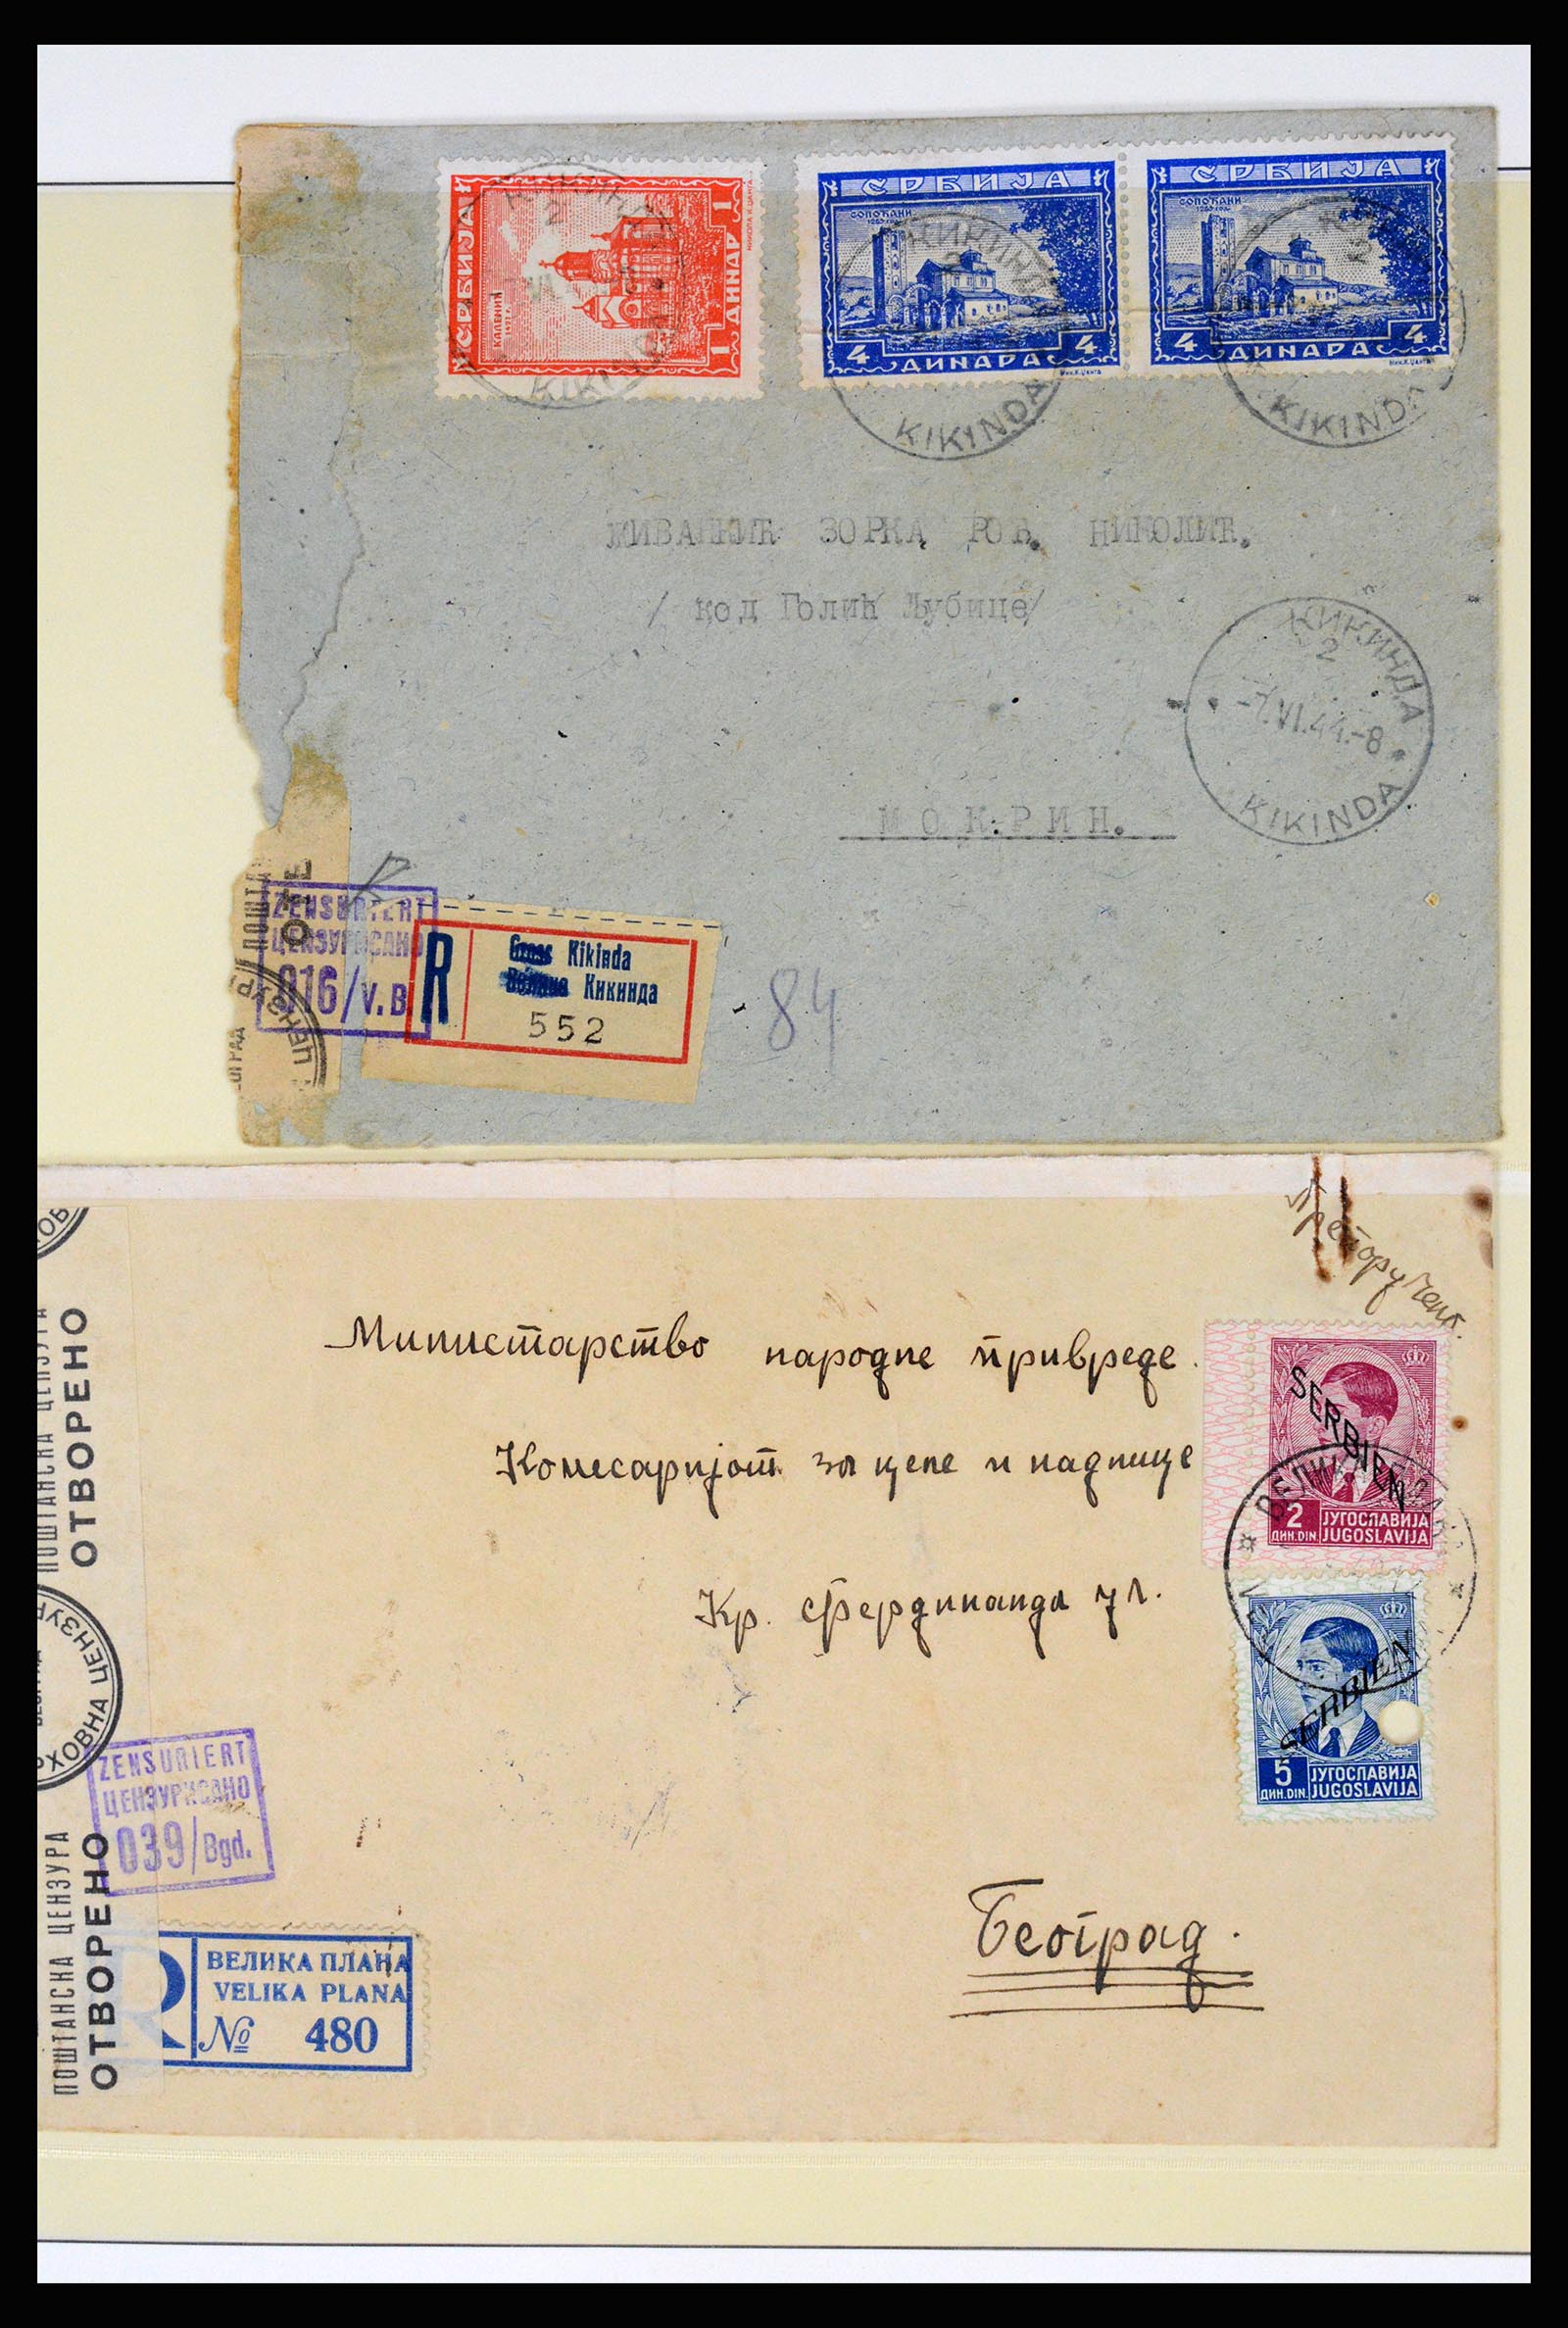 37066 004 - Stamp collection 37066 Serbia covers WW II.